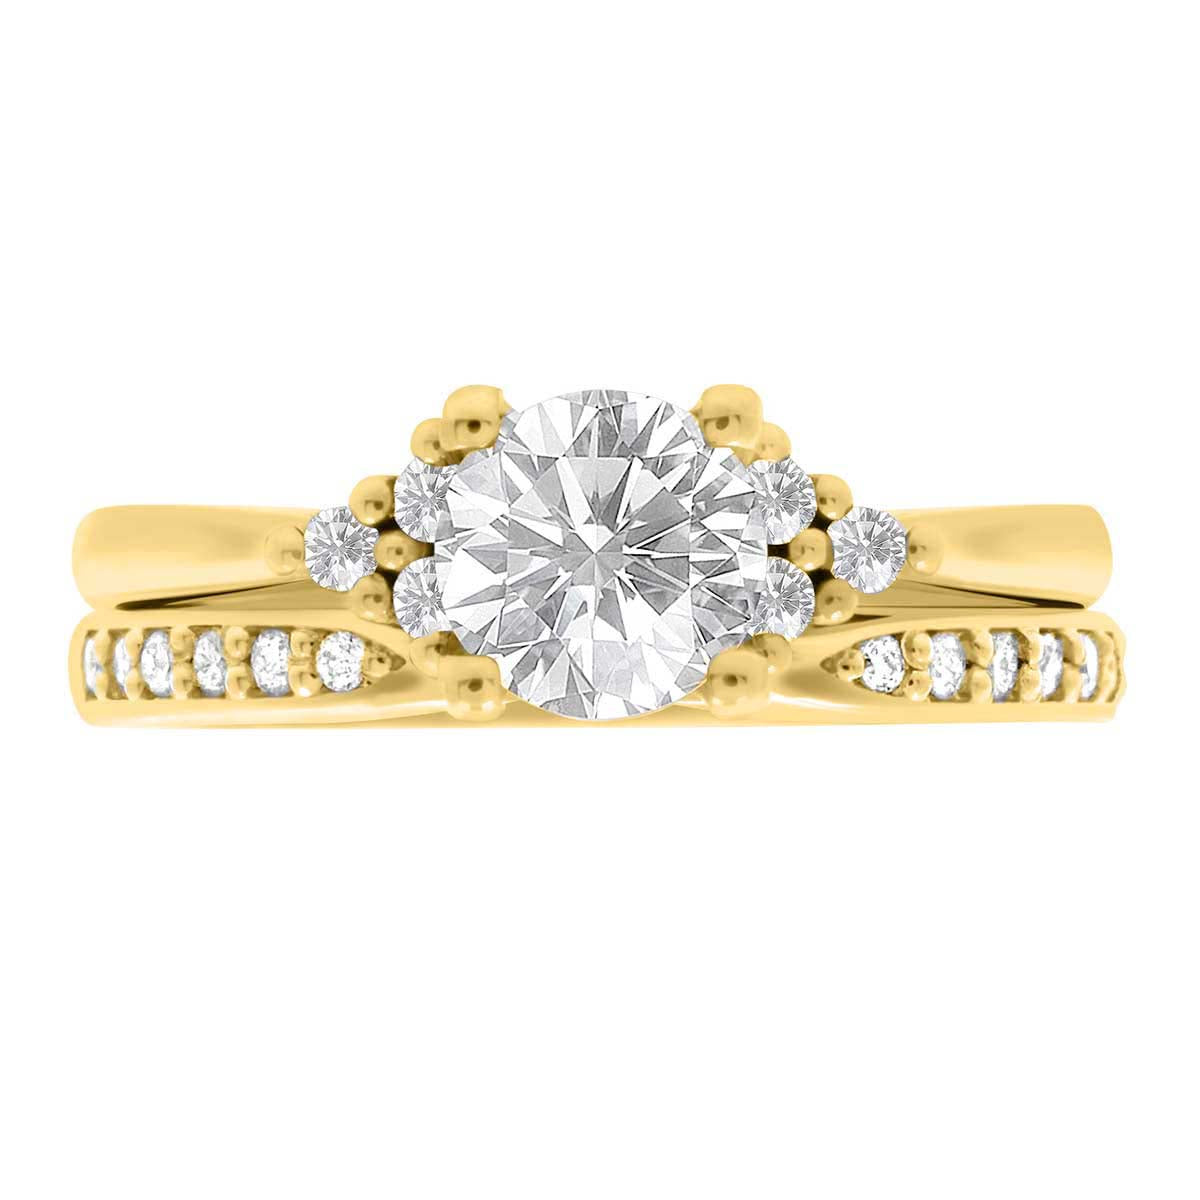 Handmade Engagement Ring in yellow gold with a diamond wedding ring